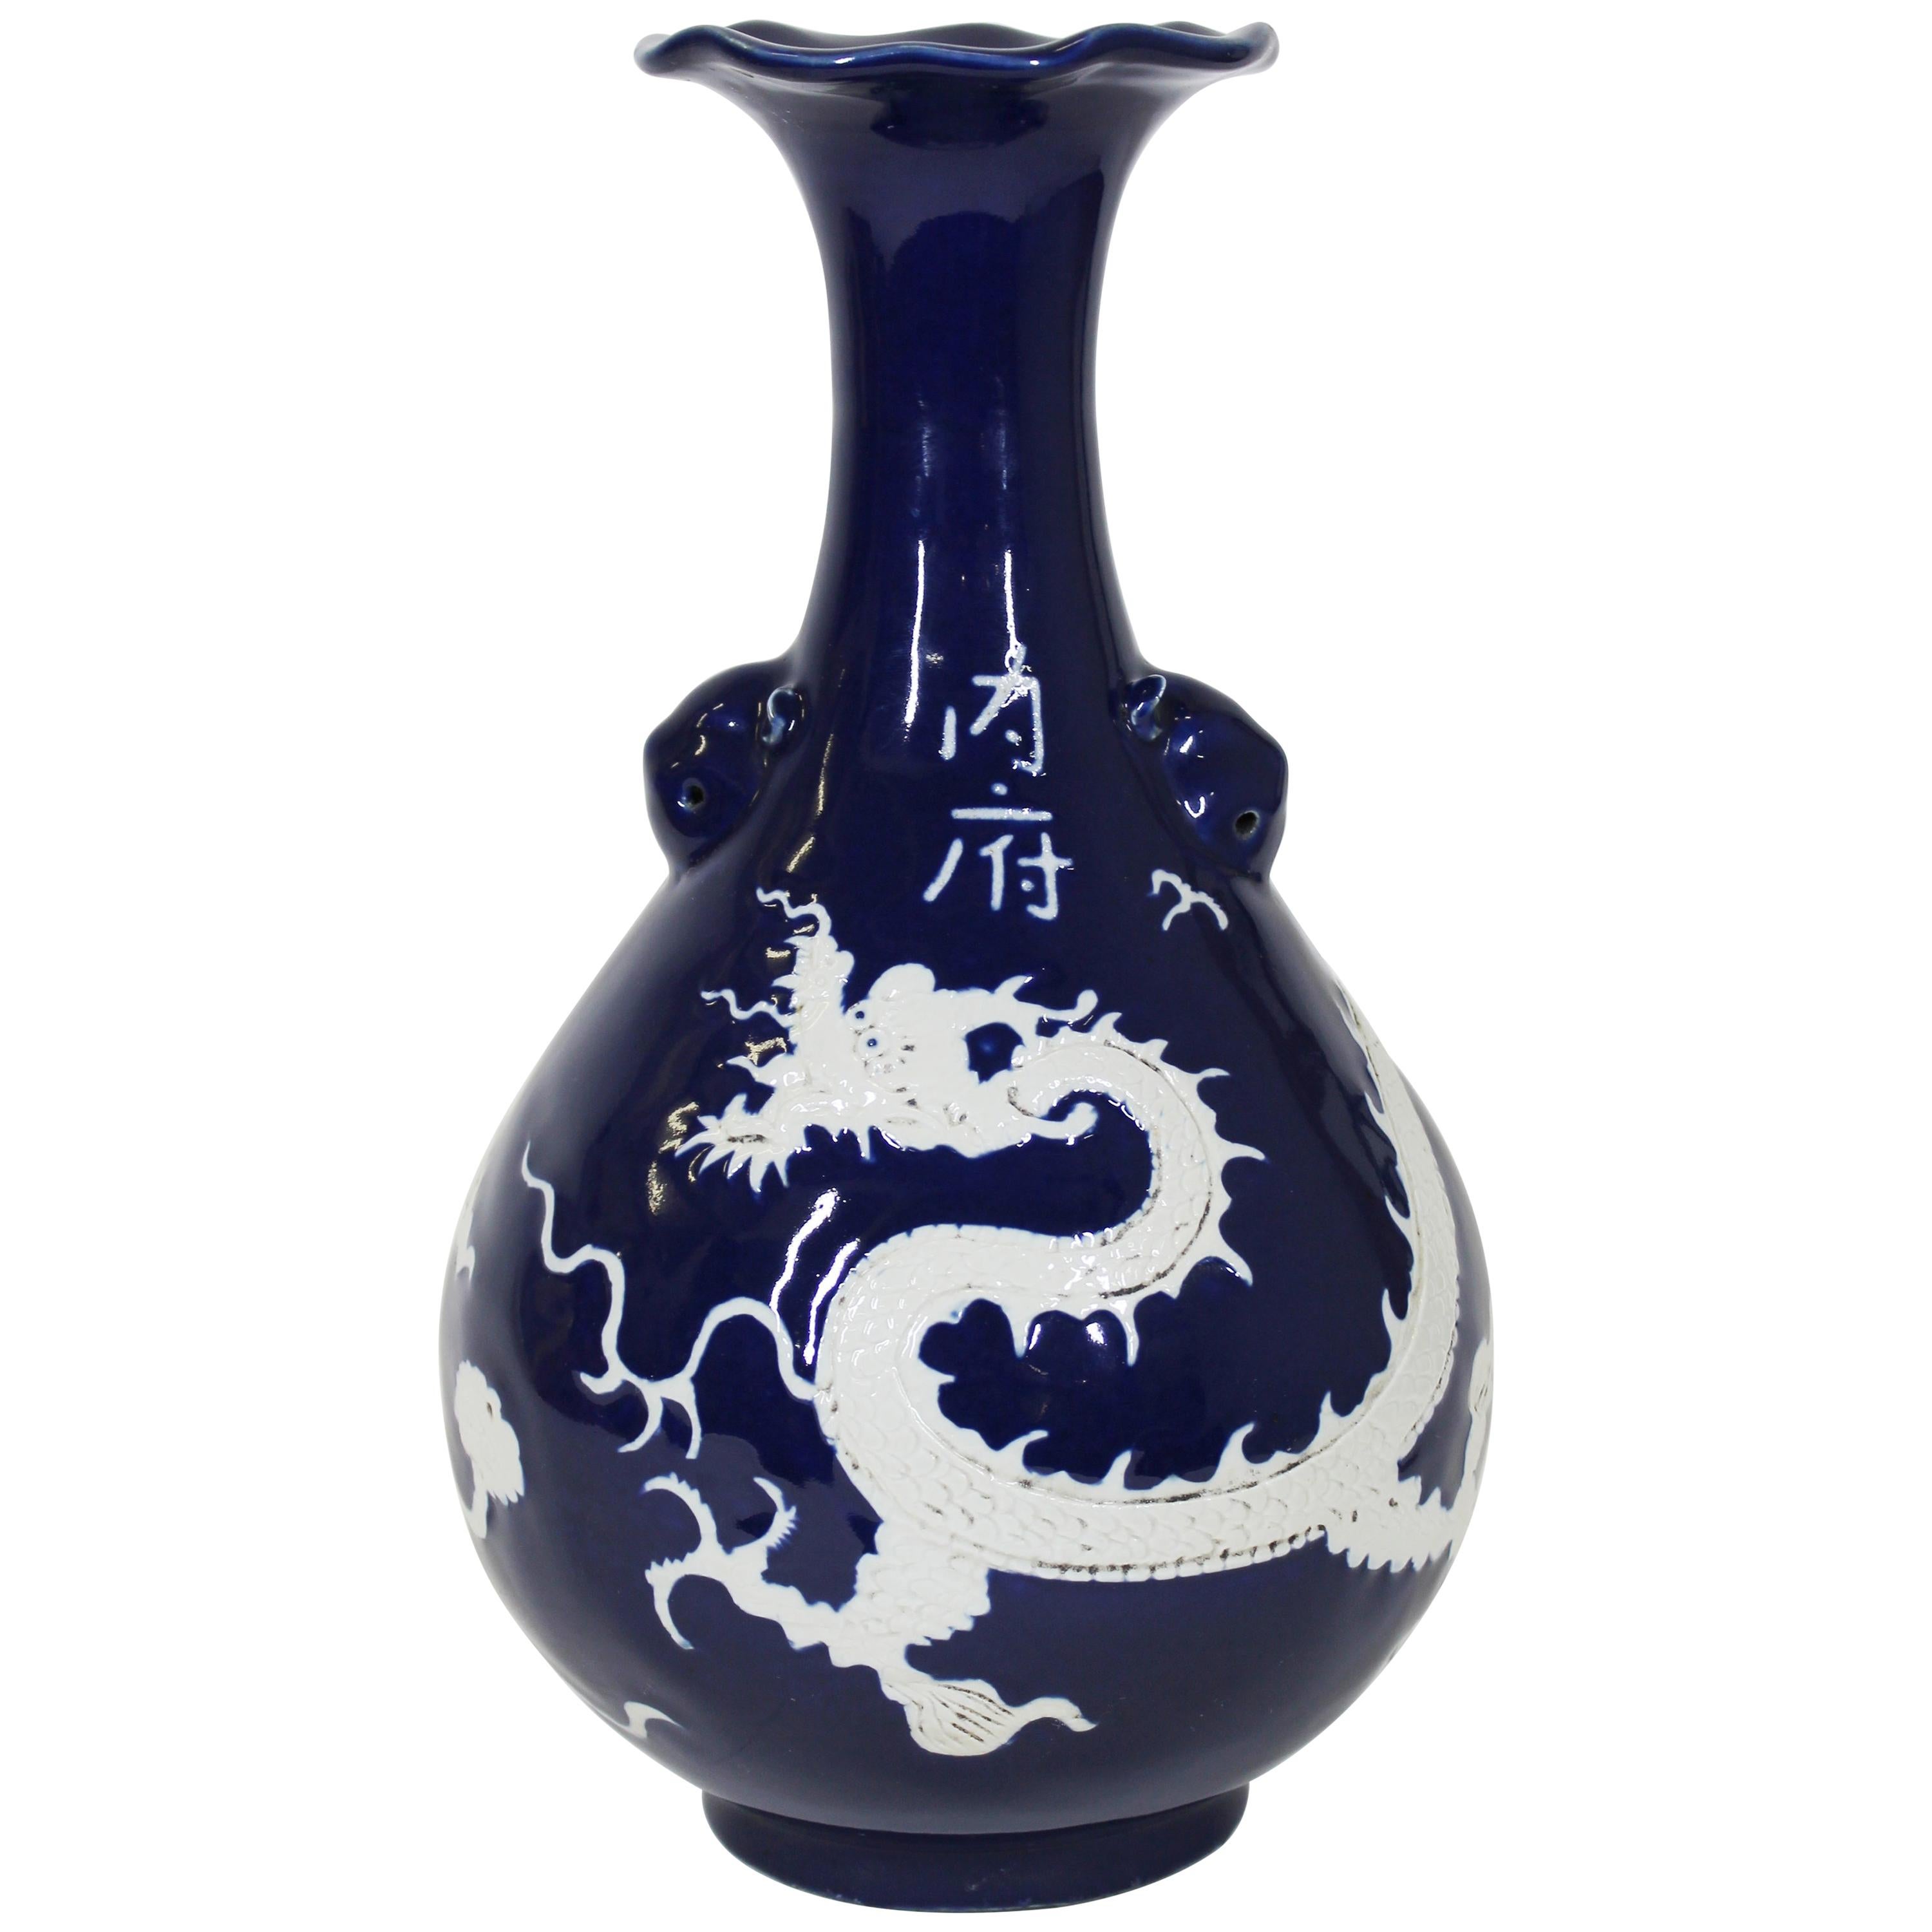 Chinese Qing Cobalt Blue and White Porcelain Vase with Dragon Motif